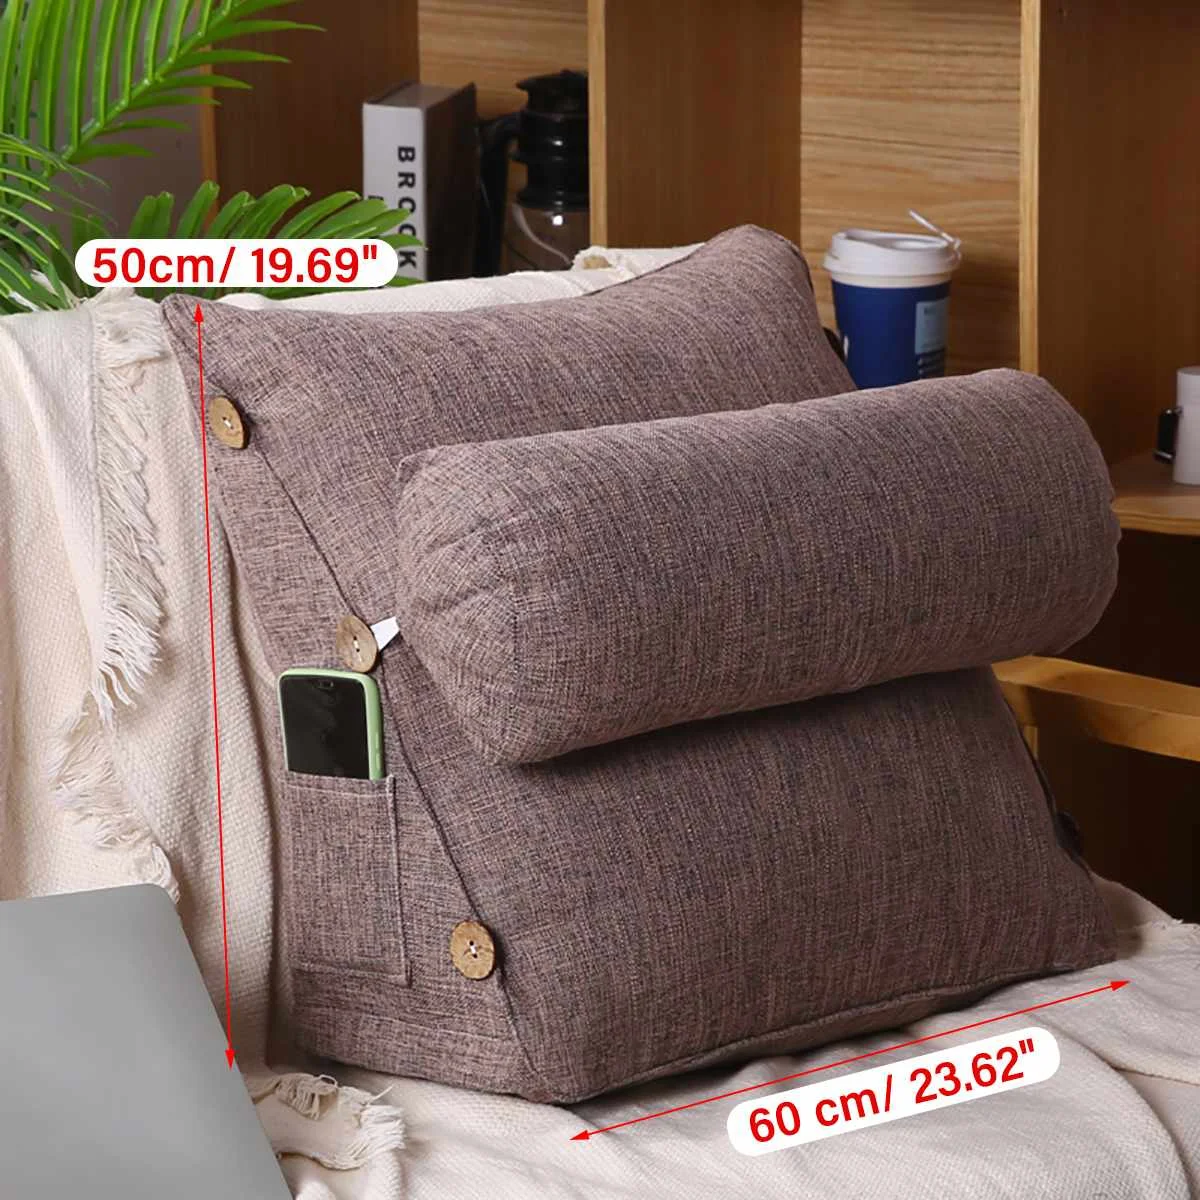 Coffee, Full YXCSELL Corduroy Filled Triangular Wedge Cushion Couch Bed Chair Backrest with Pocket Positioning Support Pillow Reading Office Lumbar Pad with Removable Cover